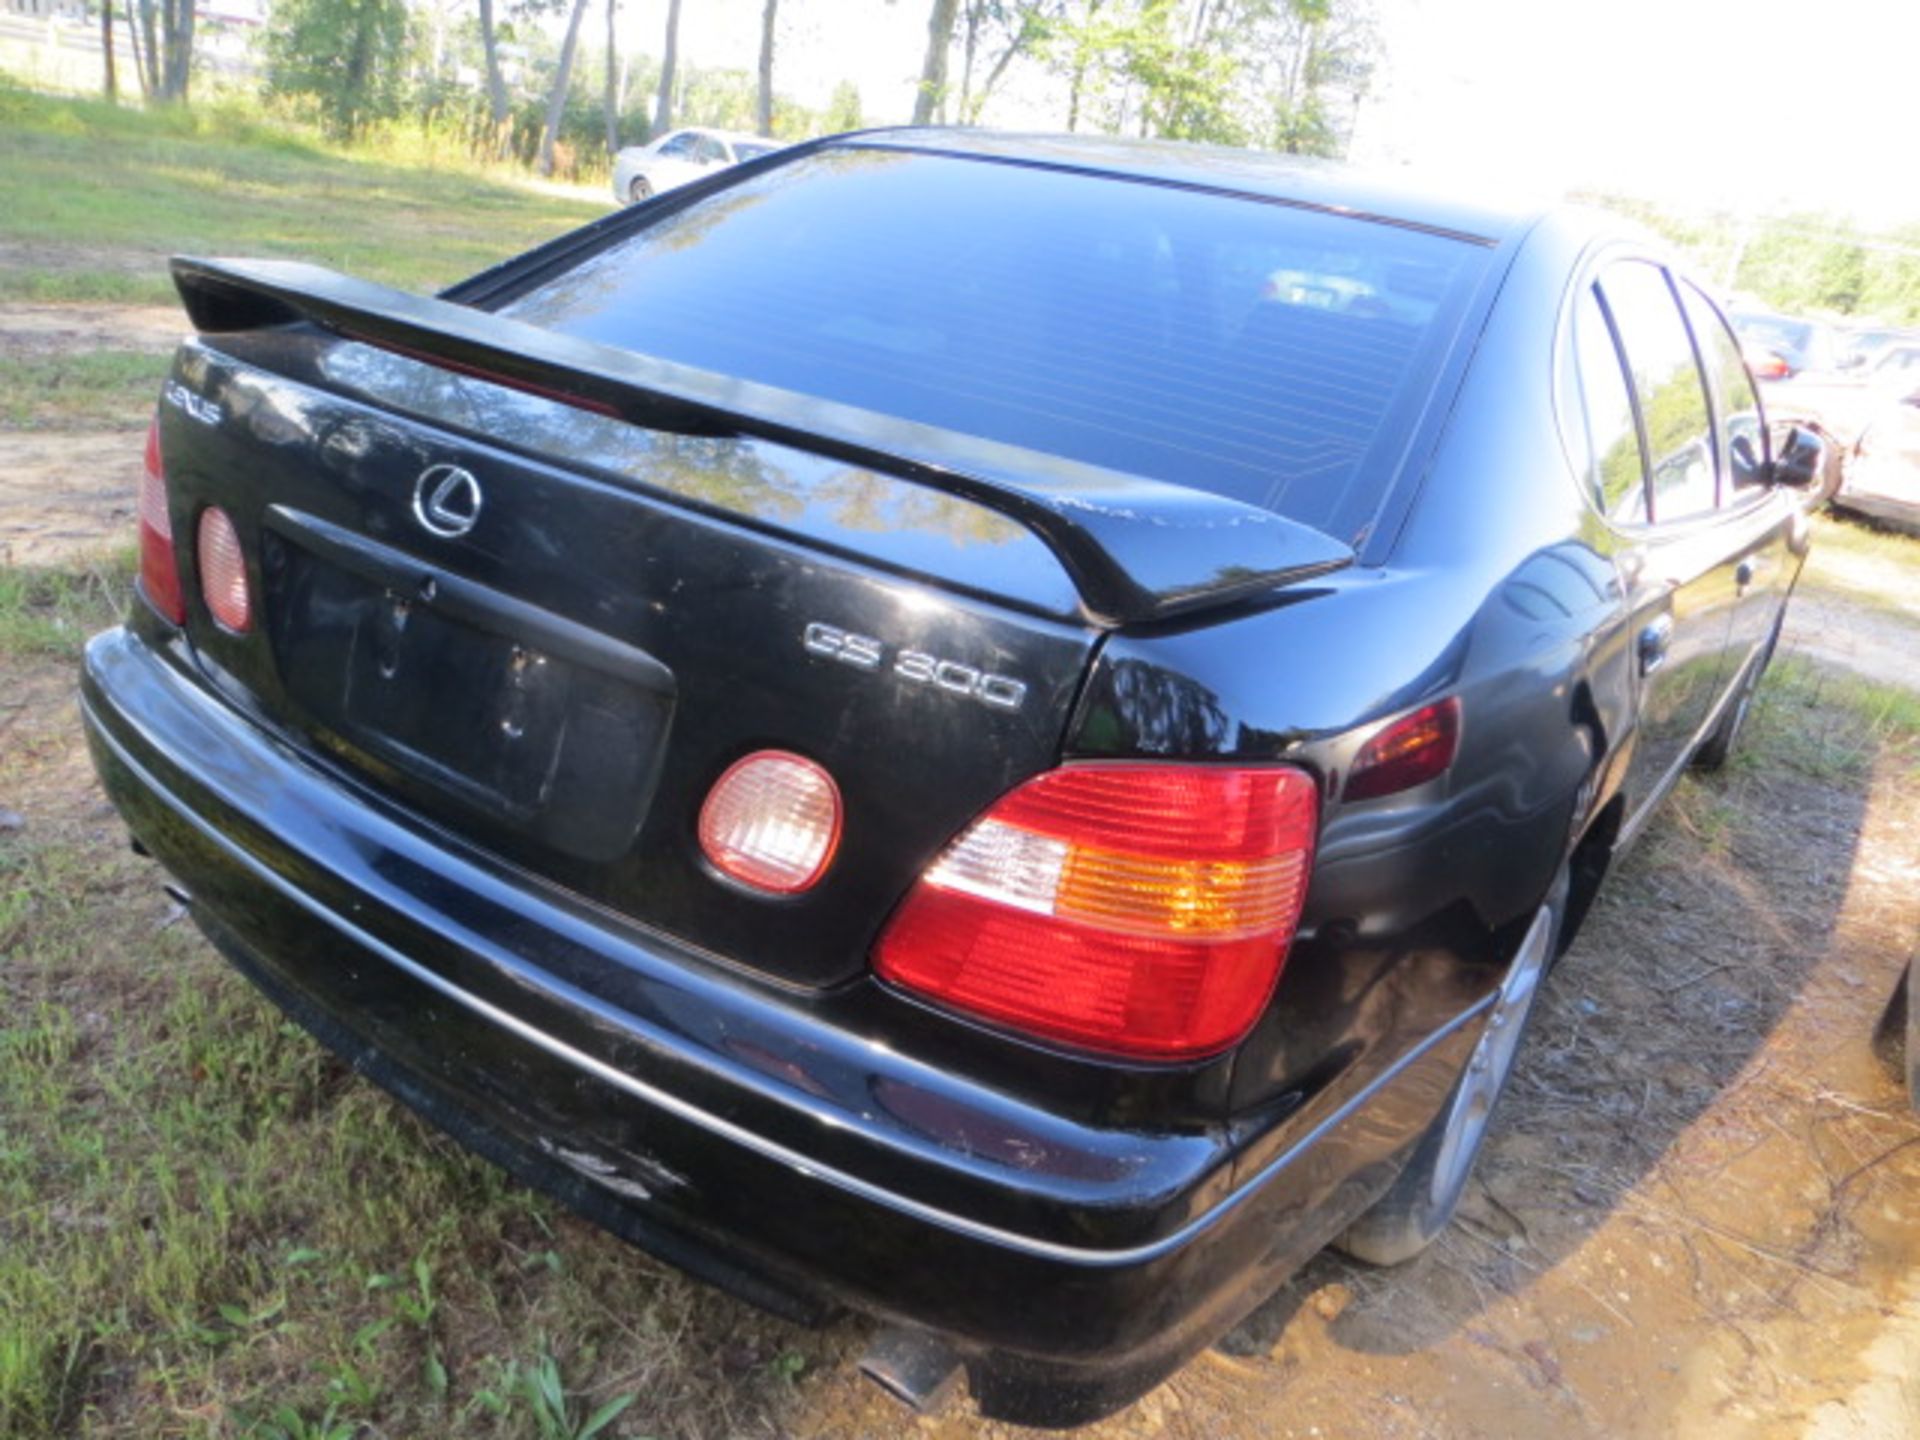 1999 Lexus GS300 187000 MILES,VIN JT8BD68SXX00568417, SOLD WITH GOOD TRANSFERABLE TITLE, ALL VEHICLE - Image 4 of 4